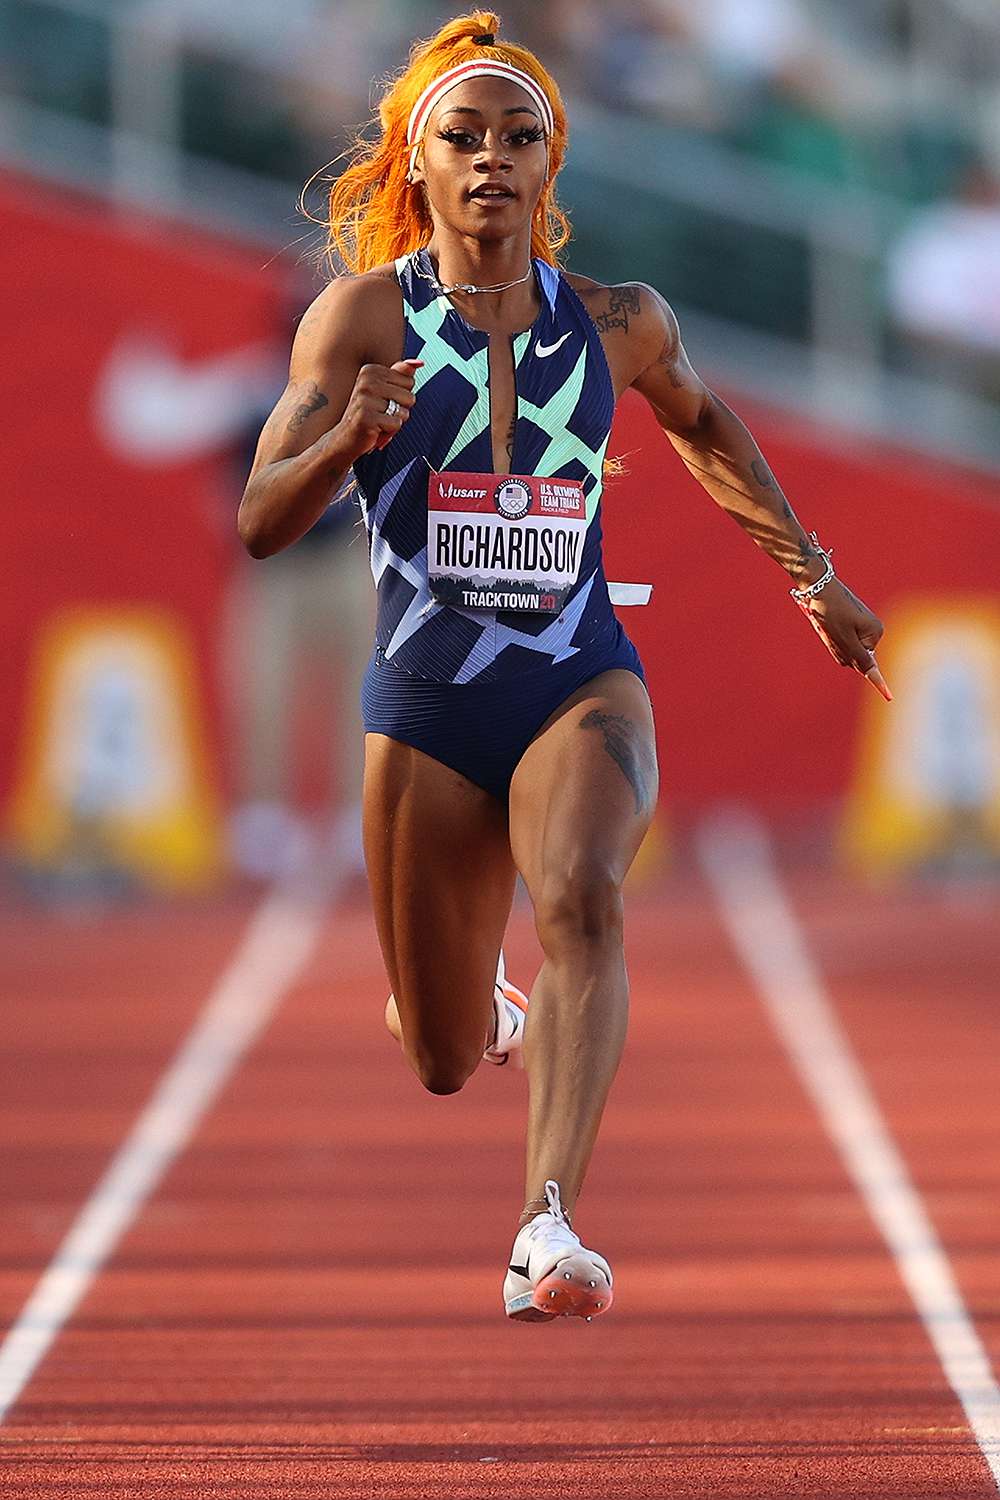 Sha'Carri Richardson Not Named on Relay Team for Tokyo Olympics After